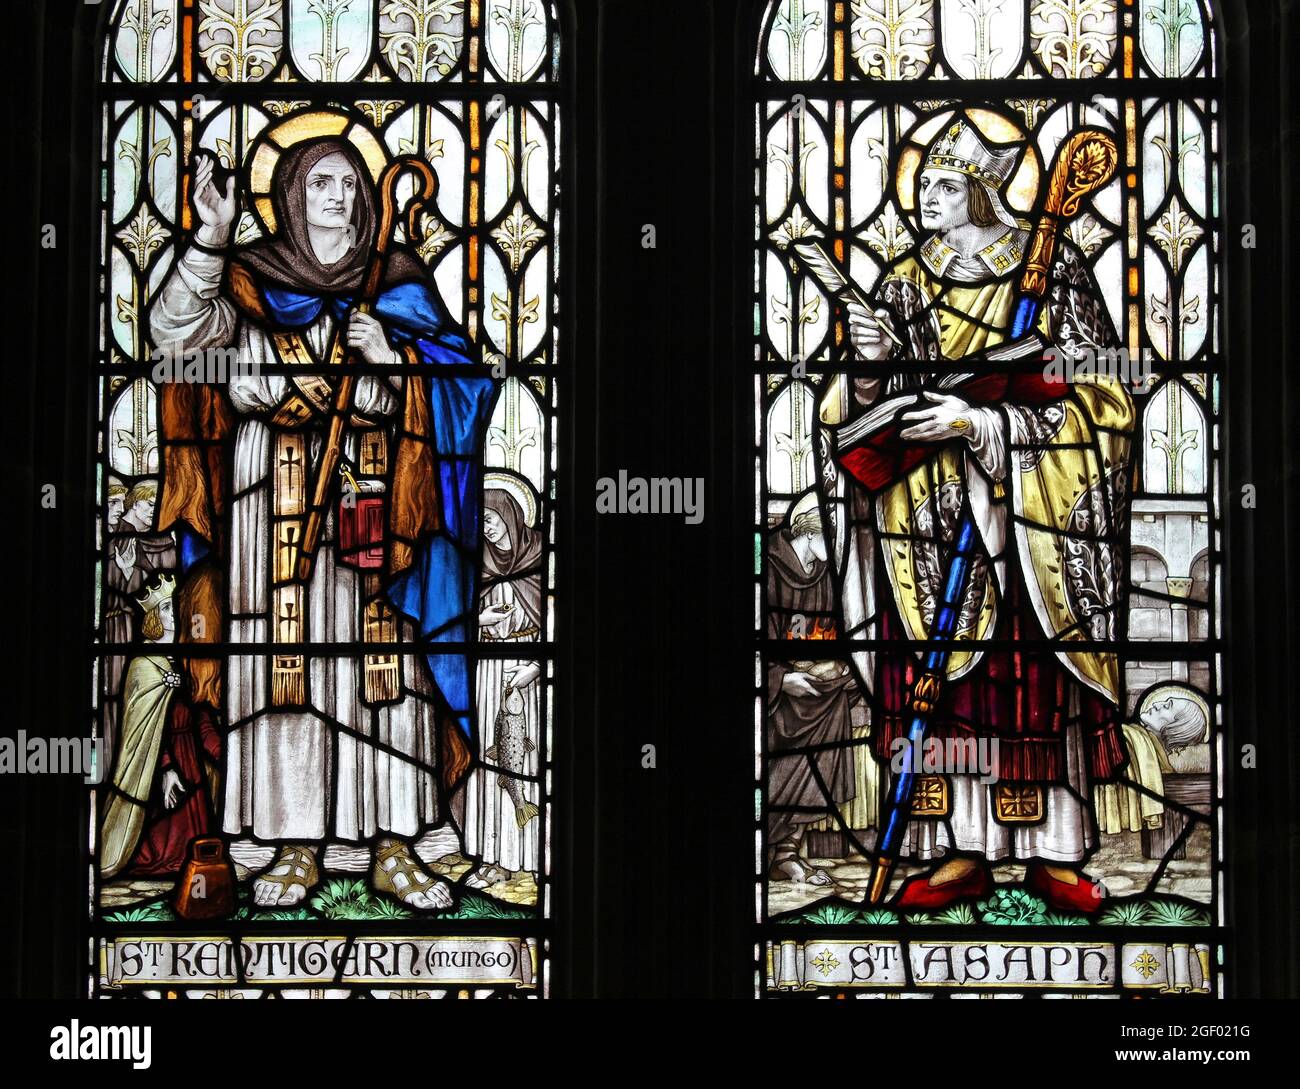 Stained Glass Window Depicting St Kentigern a.k.a. St Mungo and St Asaph in St Asaph Cathedral, Wales Stock Photo